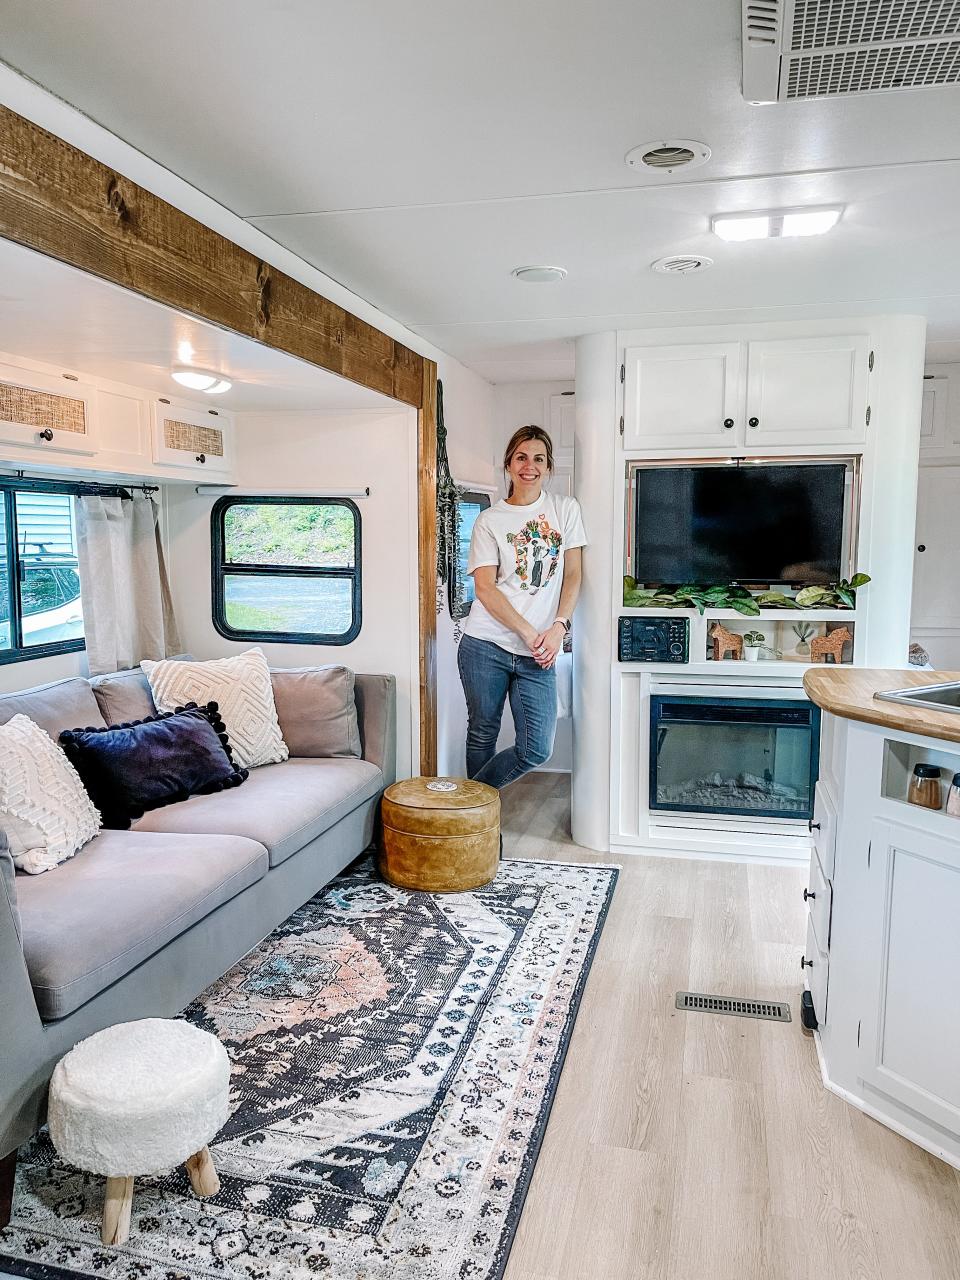 Kat Chandler chose a soothing palette to freshen up the interior of her 2014 camper. Fountain City, April 14, 2023